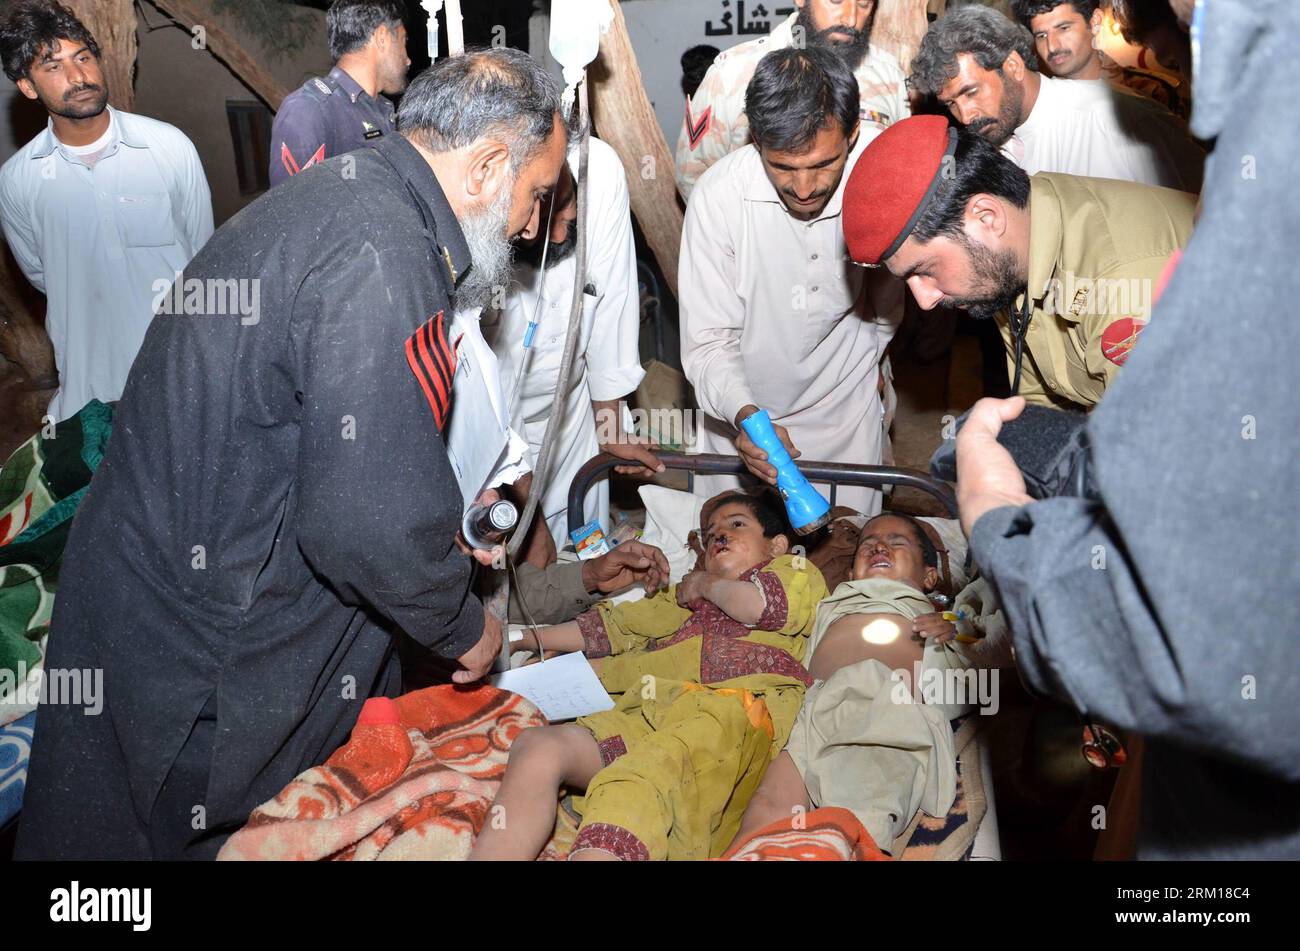 Bildnummer: 59536900  Datum: 17.04.2013  Copyright: imago/Xinhua (130418) -- MASHKEL, April 18, 2013 (Xinhua) -- Injured Pakistani earthquake survivors are treated at a military field hospital in the quake-hit area of southwest Pakistan s Mashkel on April 17, 2013. The Pakistani authorities on Thursday said that rescue operations had been sped up in areas affected by the Tuesday s 7.9 magnitude earthquake in the country s southwestern province of Balochistan near Pak-Iran border. According to the official figures, at least 40 were killed and over 300 others injured when tremors jolted the Mash Stock Photo